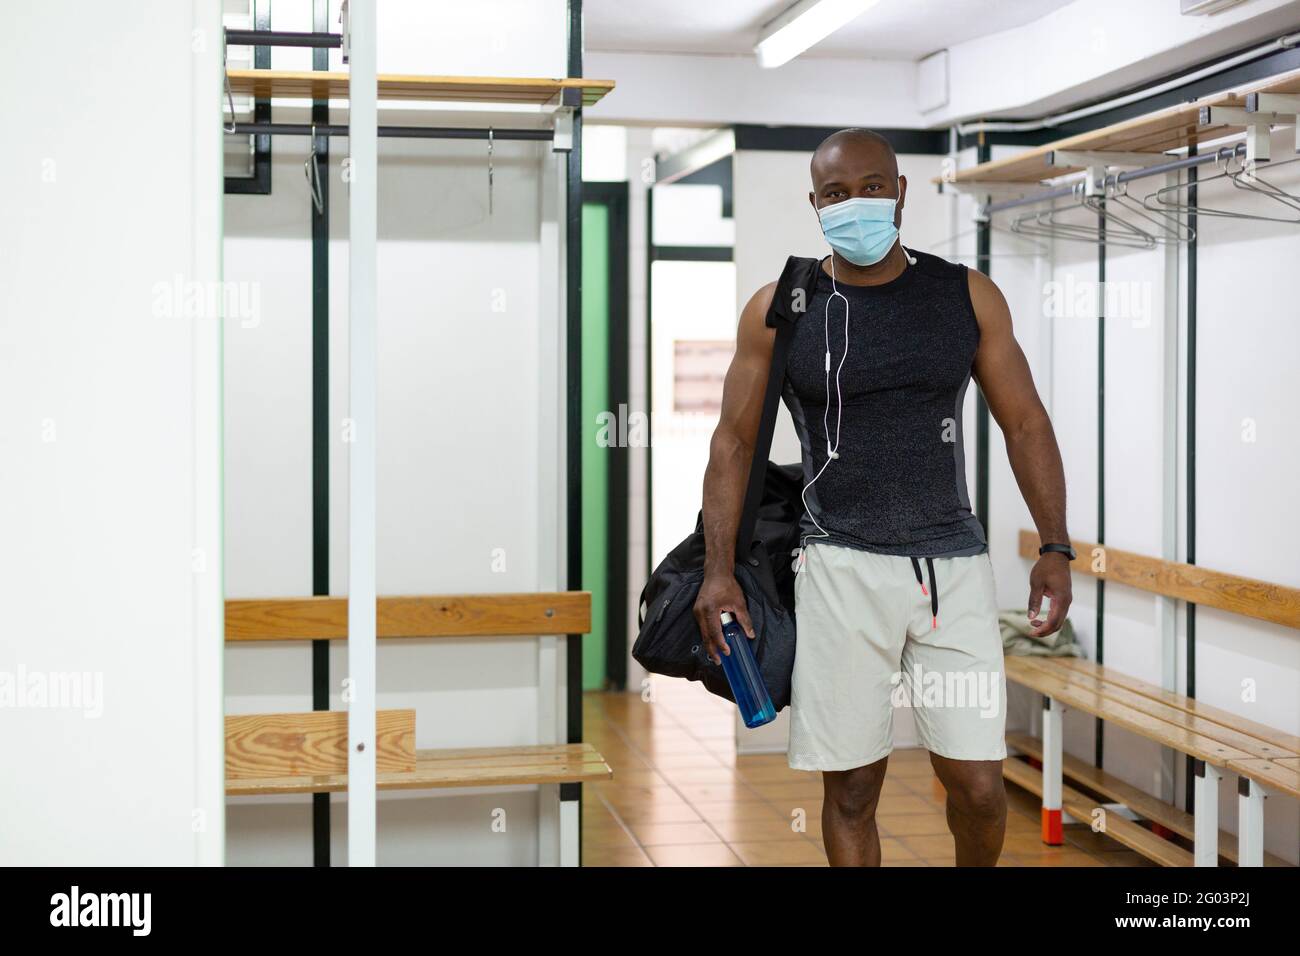 Young black male in sports clothes in gym locker room. He wears a medical mask as a protective measure against the Covid-19 coronavirus. Stock Photo